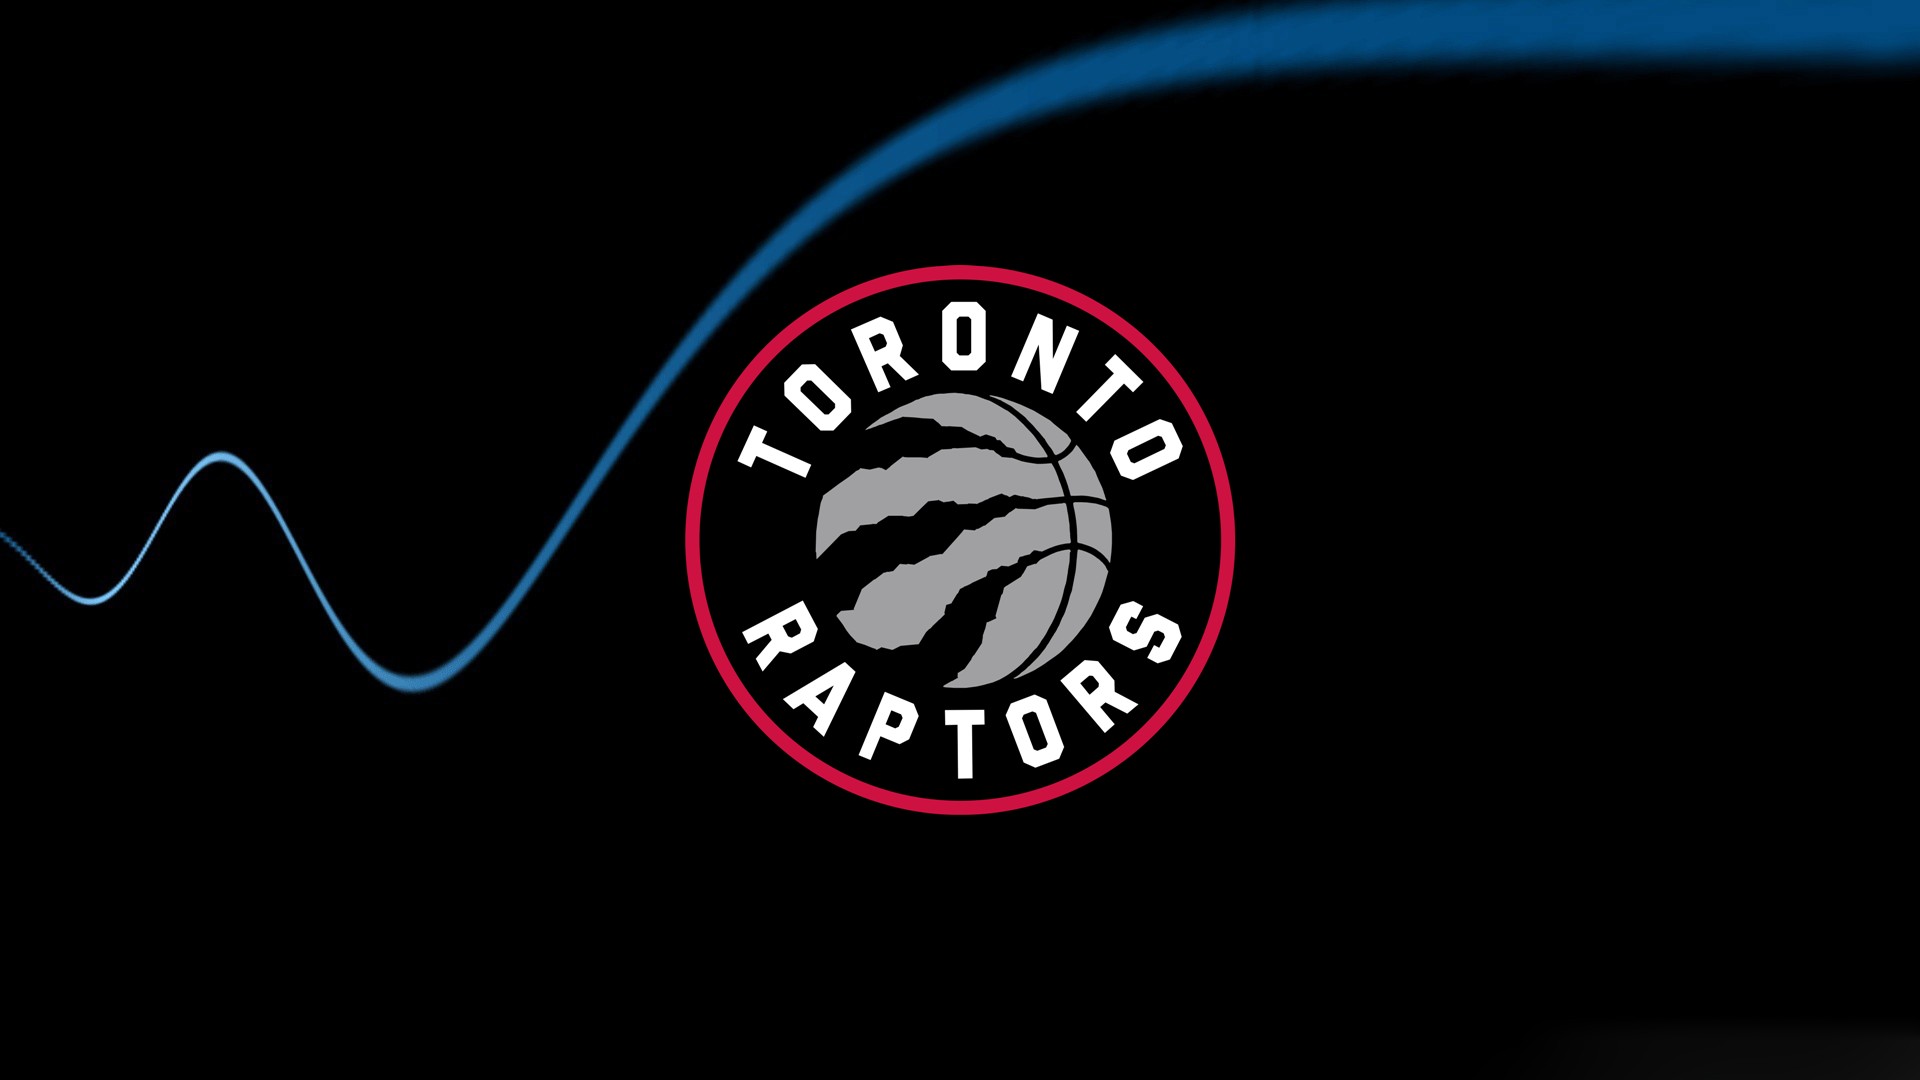 Toronto Raptors HD Wallpaper with image resolution 1920x1080 pixel. You can make this wallpaper for your Desktop Computer Backgrounds, Mac Wallpapers, Android Lock screen or iPhone Screensavers